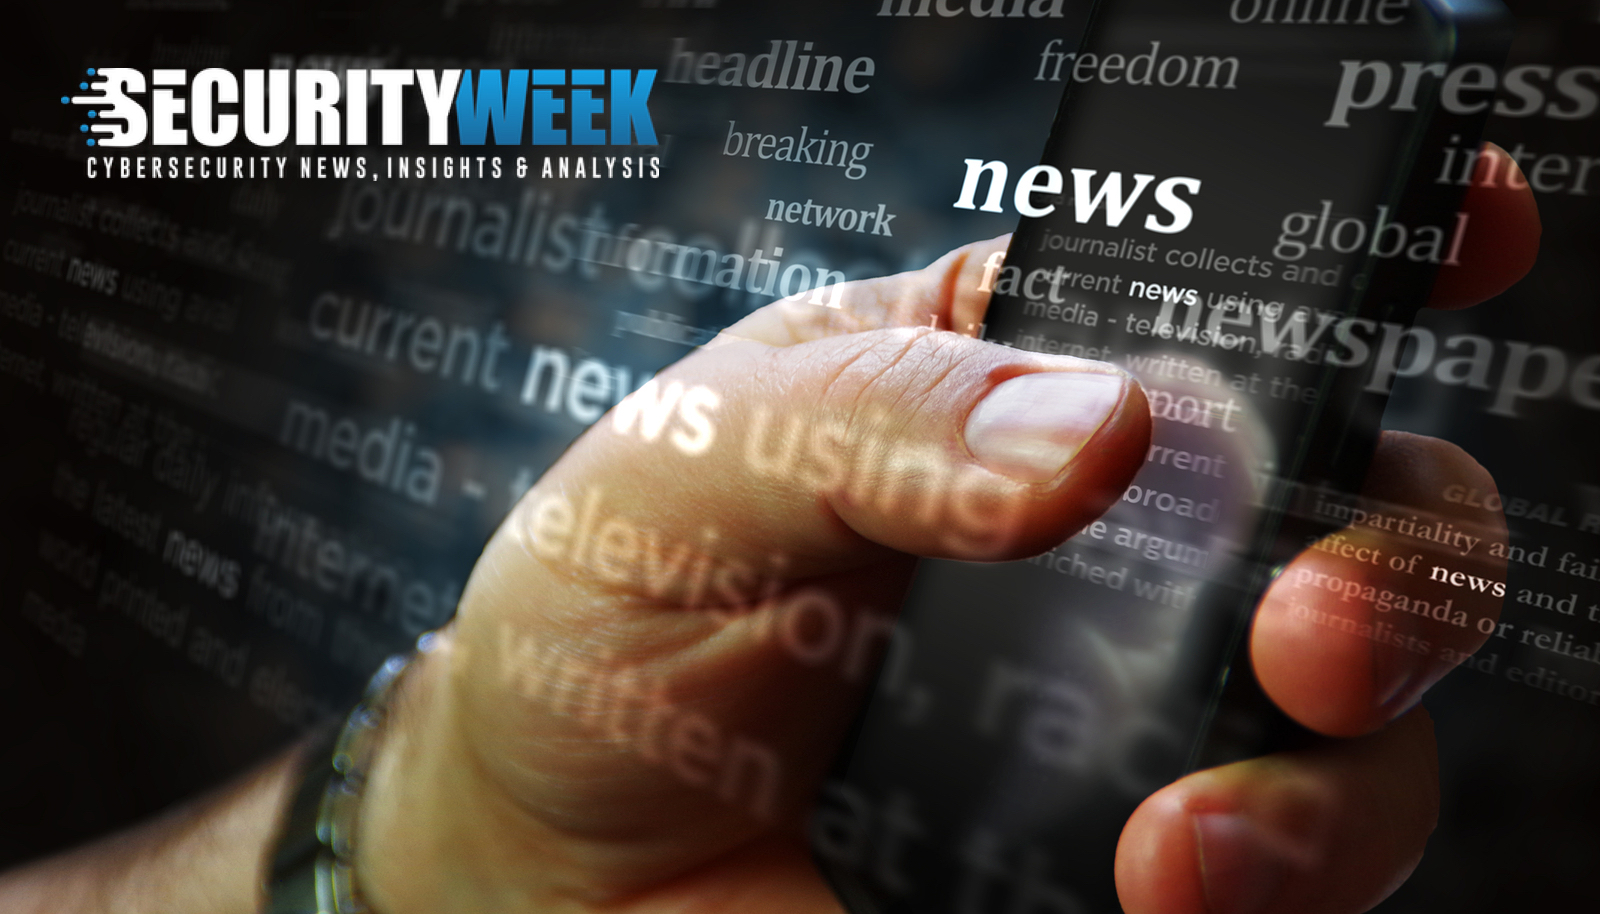 In Other News: Hacking Encrypted Linux Computers, Android Fuzzing, Skype Leaking IPs – Source: www.securityweek.com